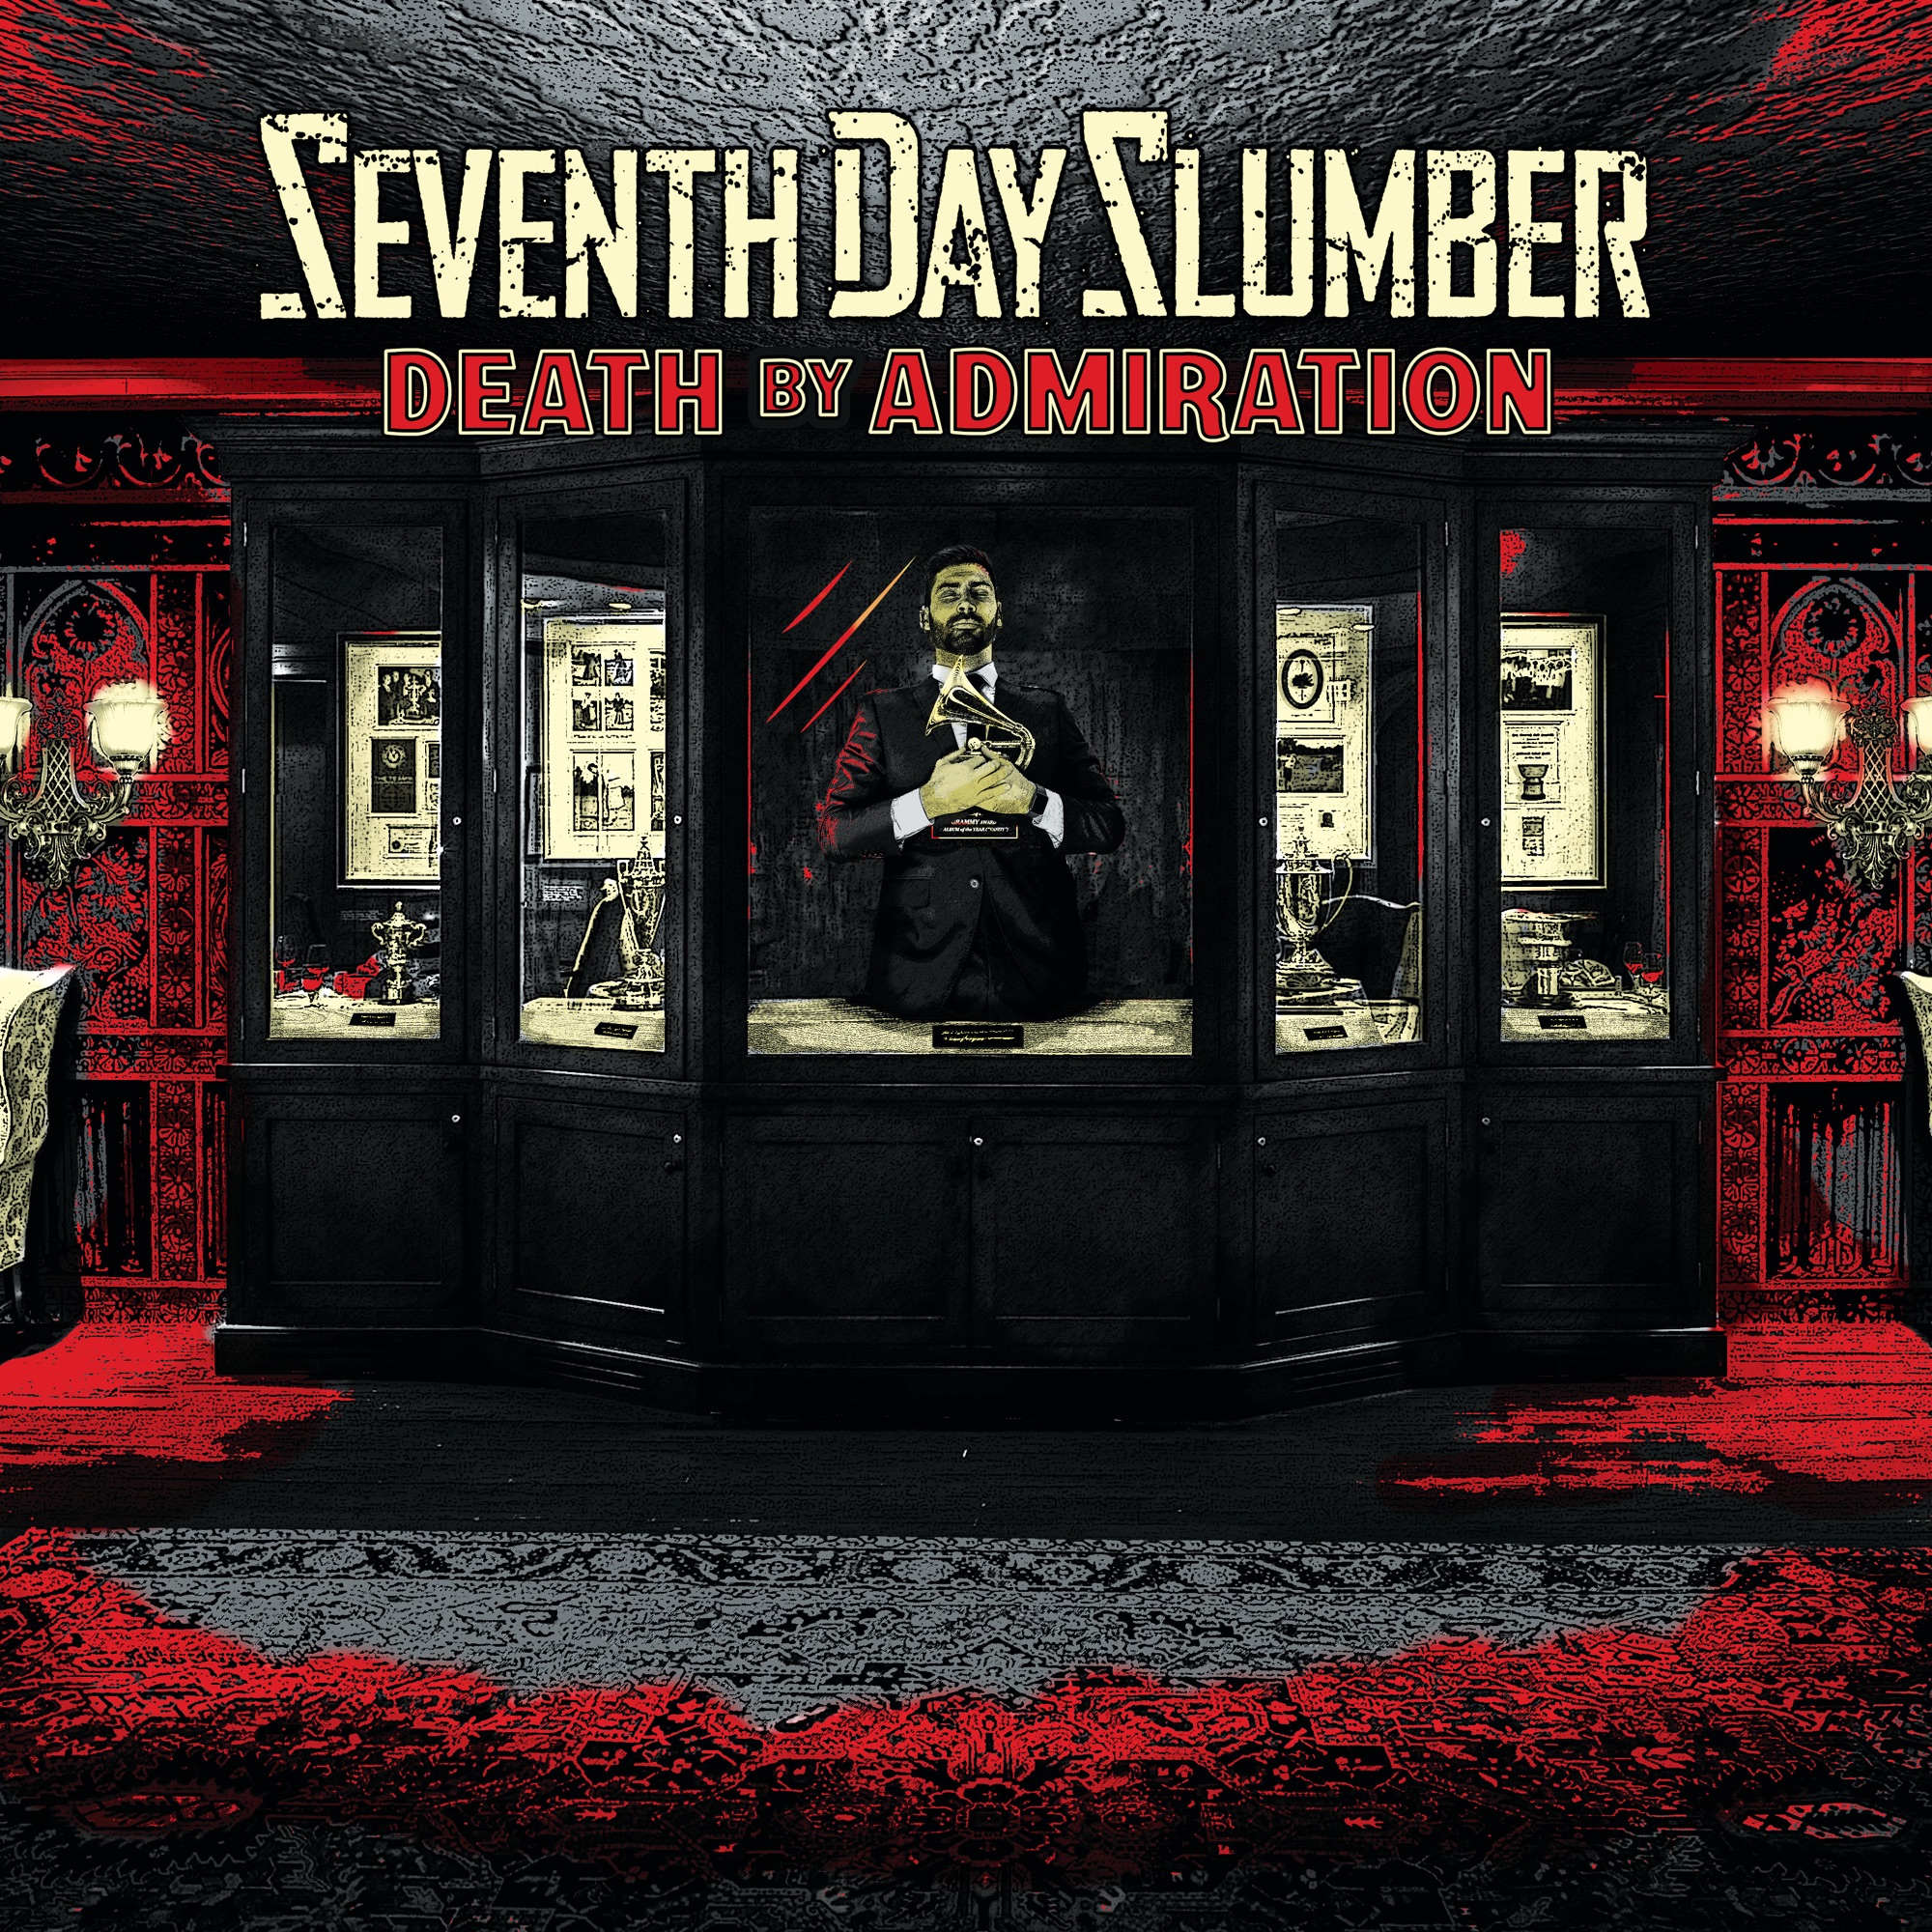 Art for Death By Admiration (feat. The Word Alive) by Seventh Day Slumber